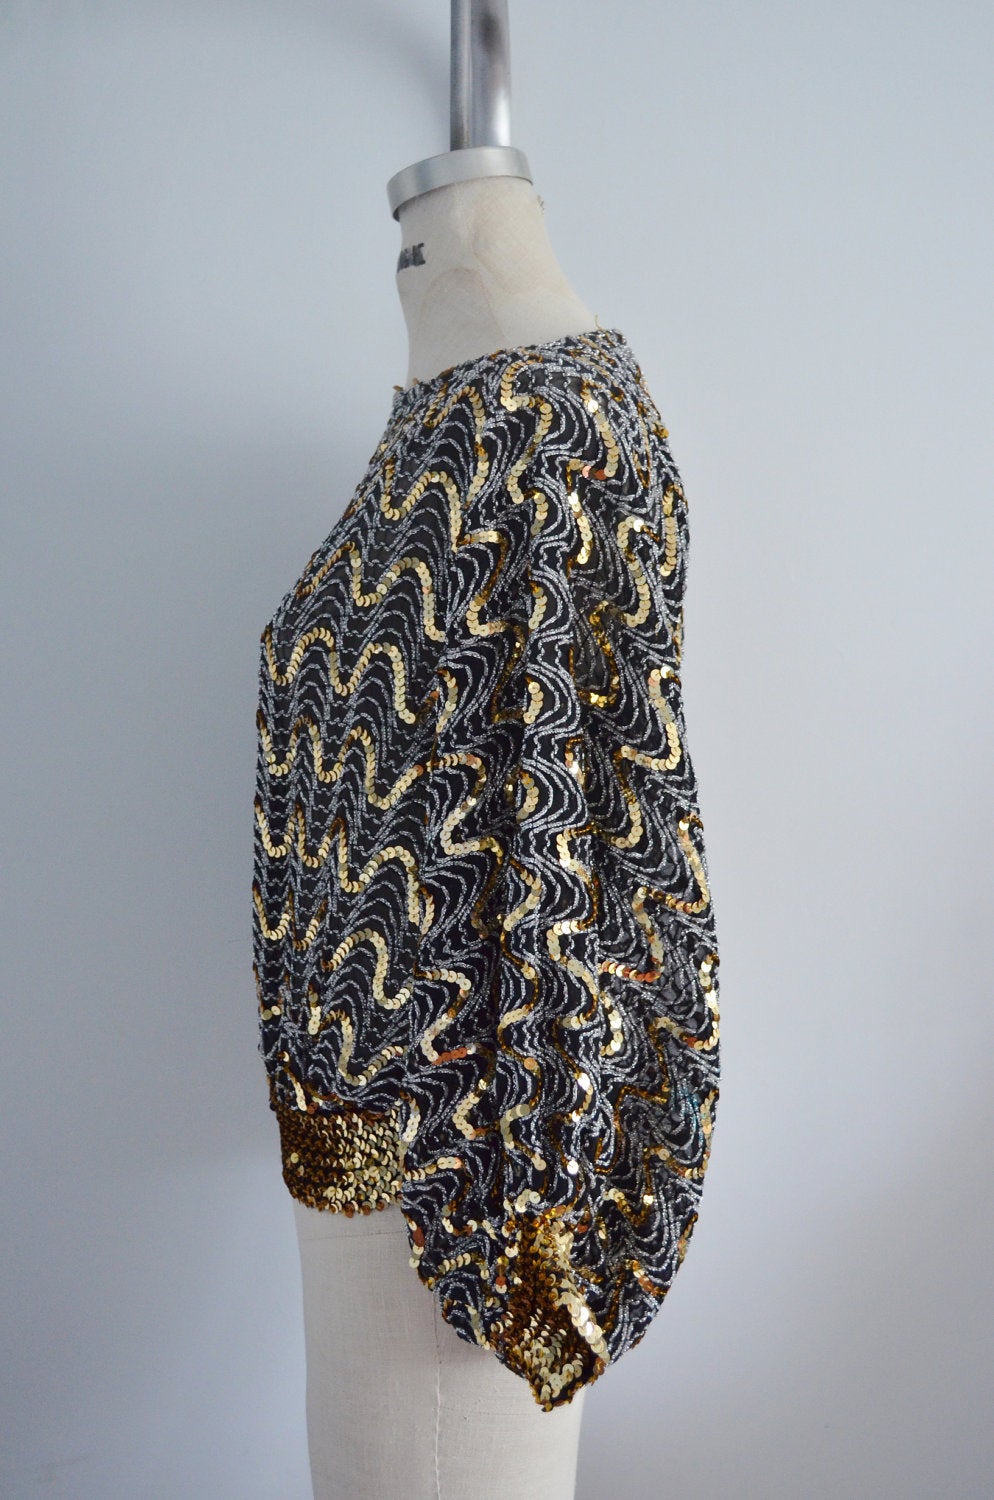 70S Glam Sequined And Beaded Batwing Disco Top Blouse Metallic Black & Gold